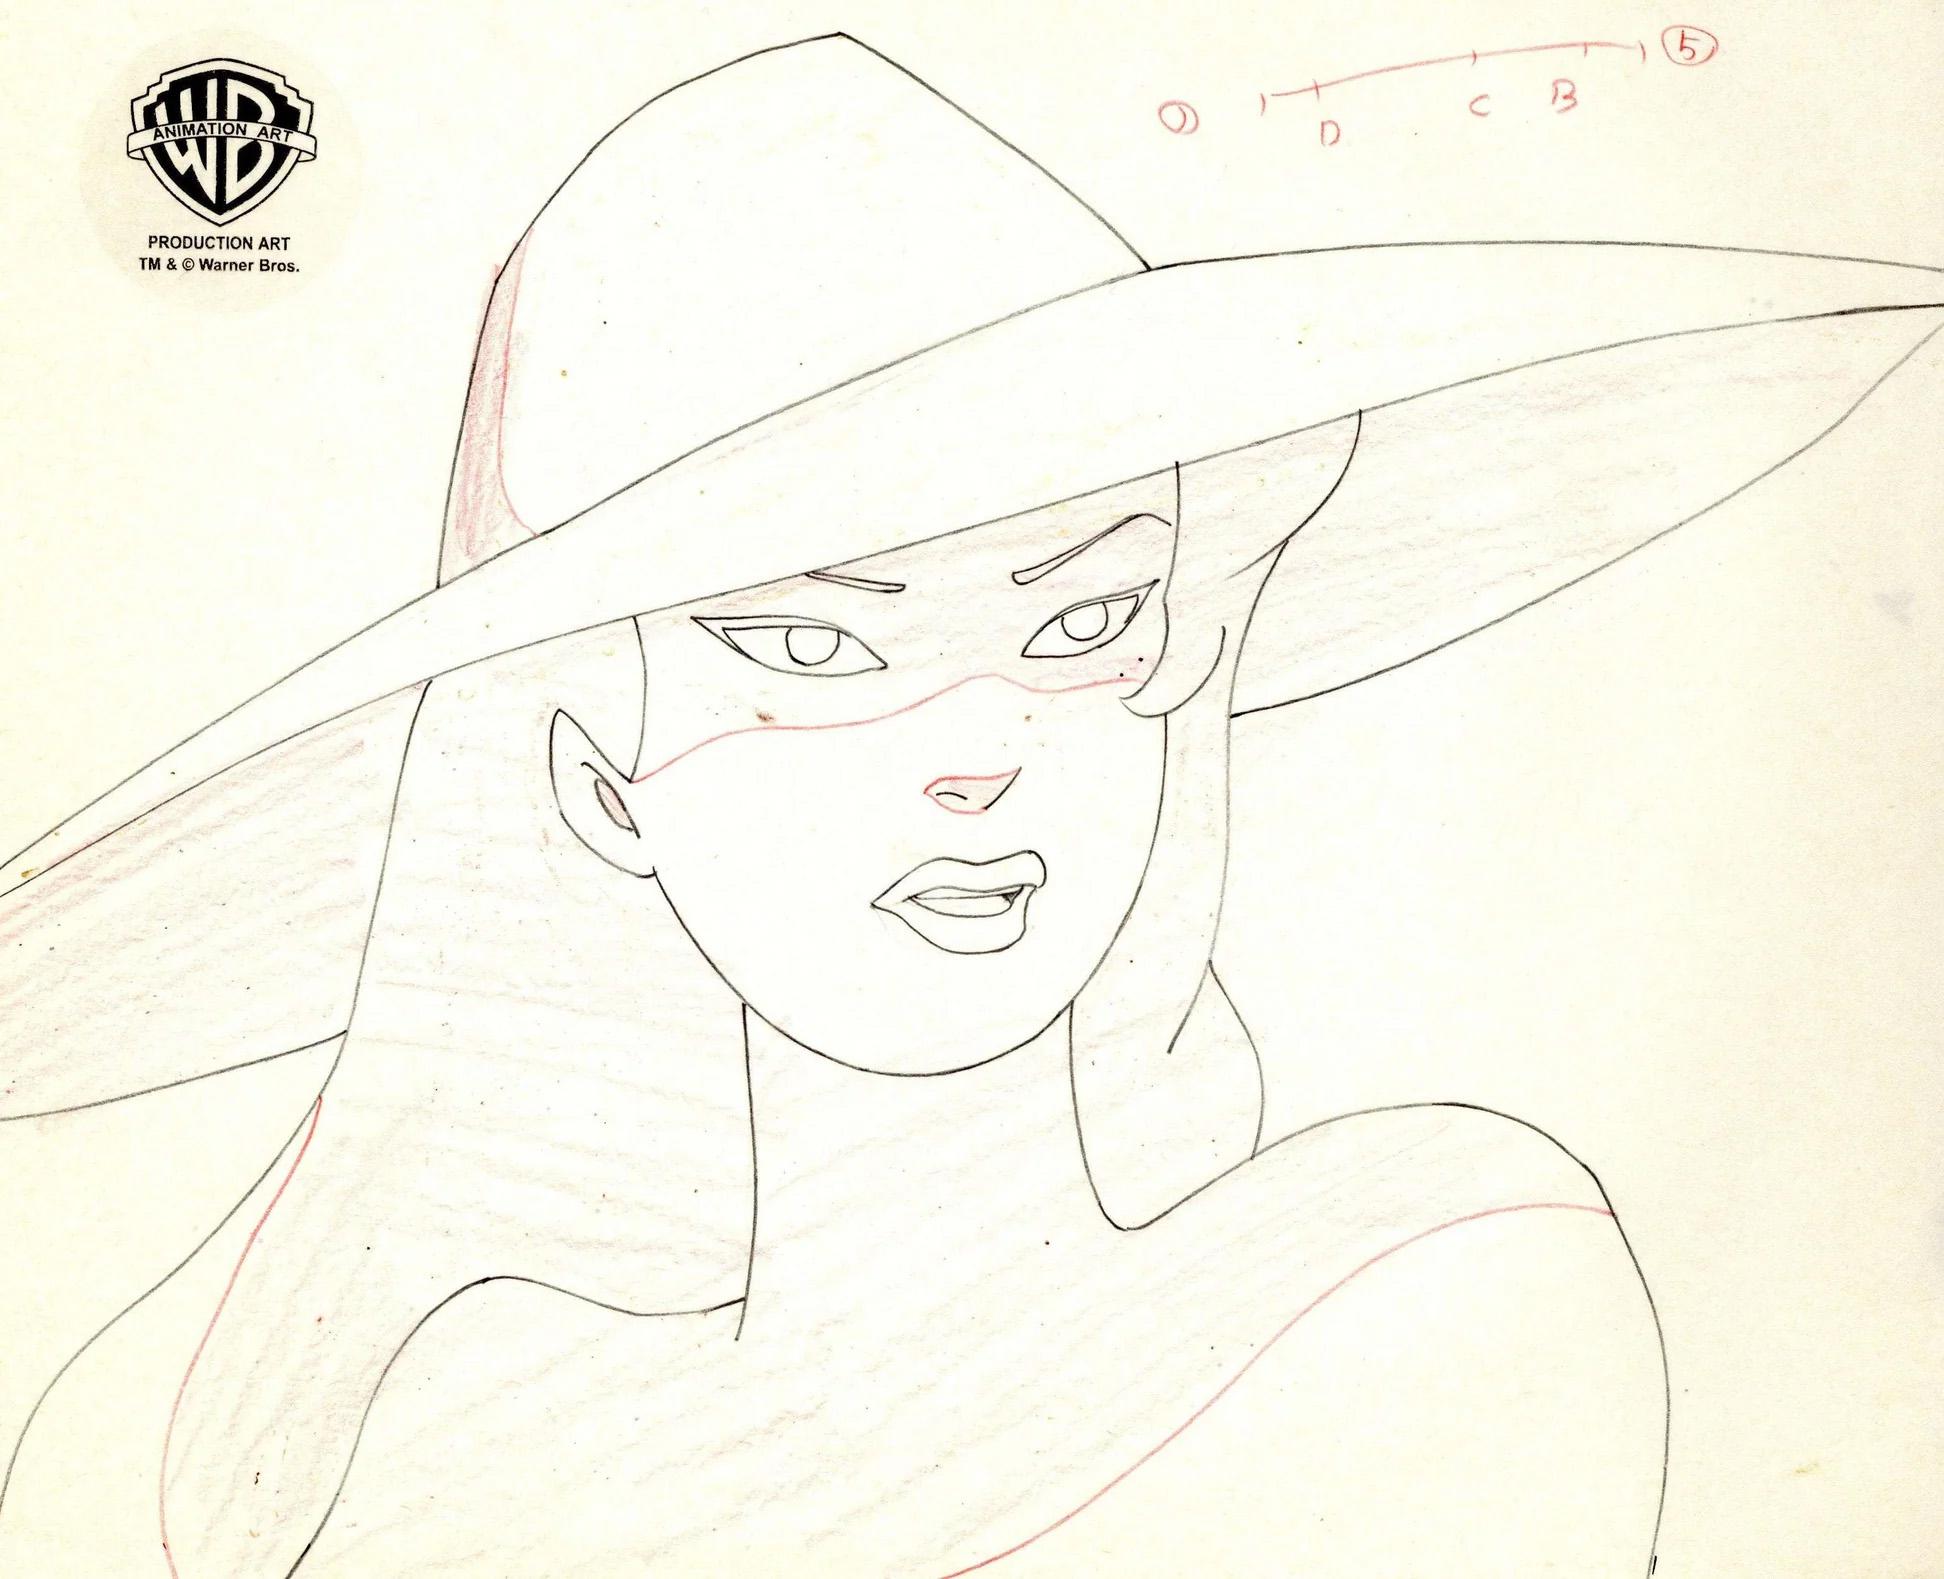 Batman The Animated Series Original Cel with Matching Drawing: Poison Ivy - Pop Art Art by DC Comics Studio Artists